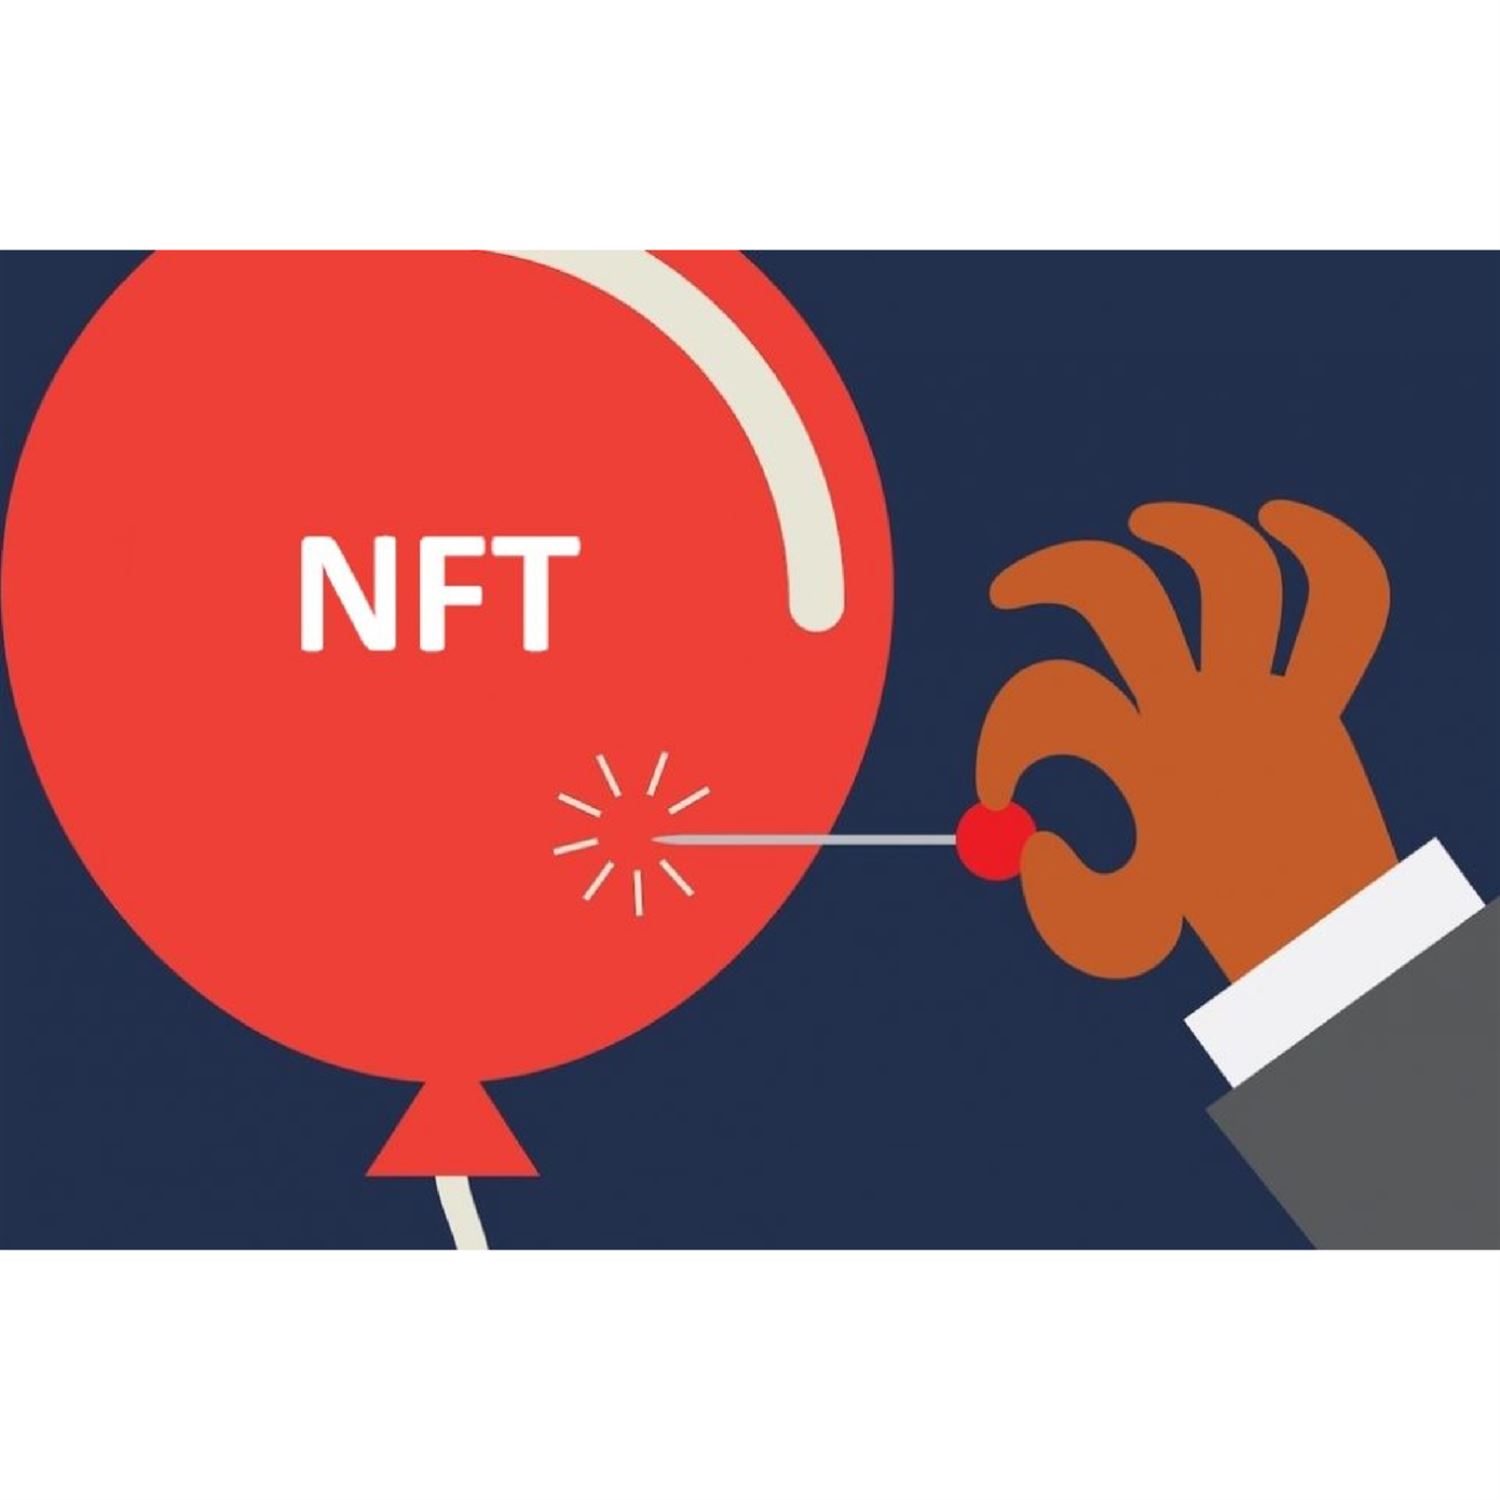 Comparison between the Dotcom Crash and the NFT bubblebetween the Dotcom Crash and the NFT bubble